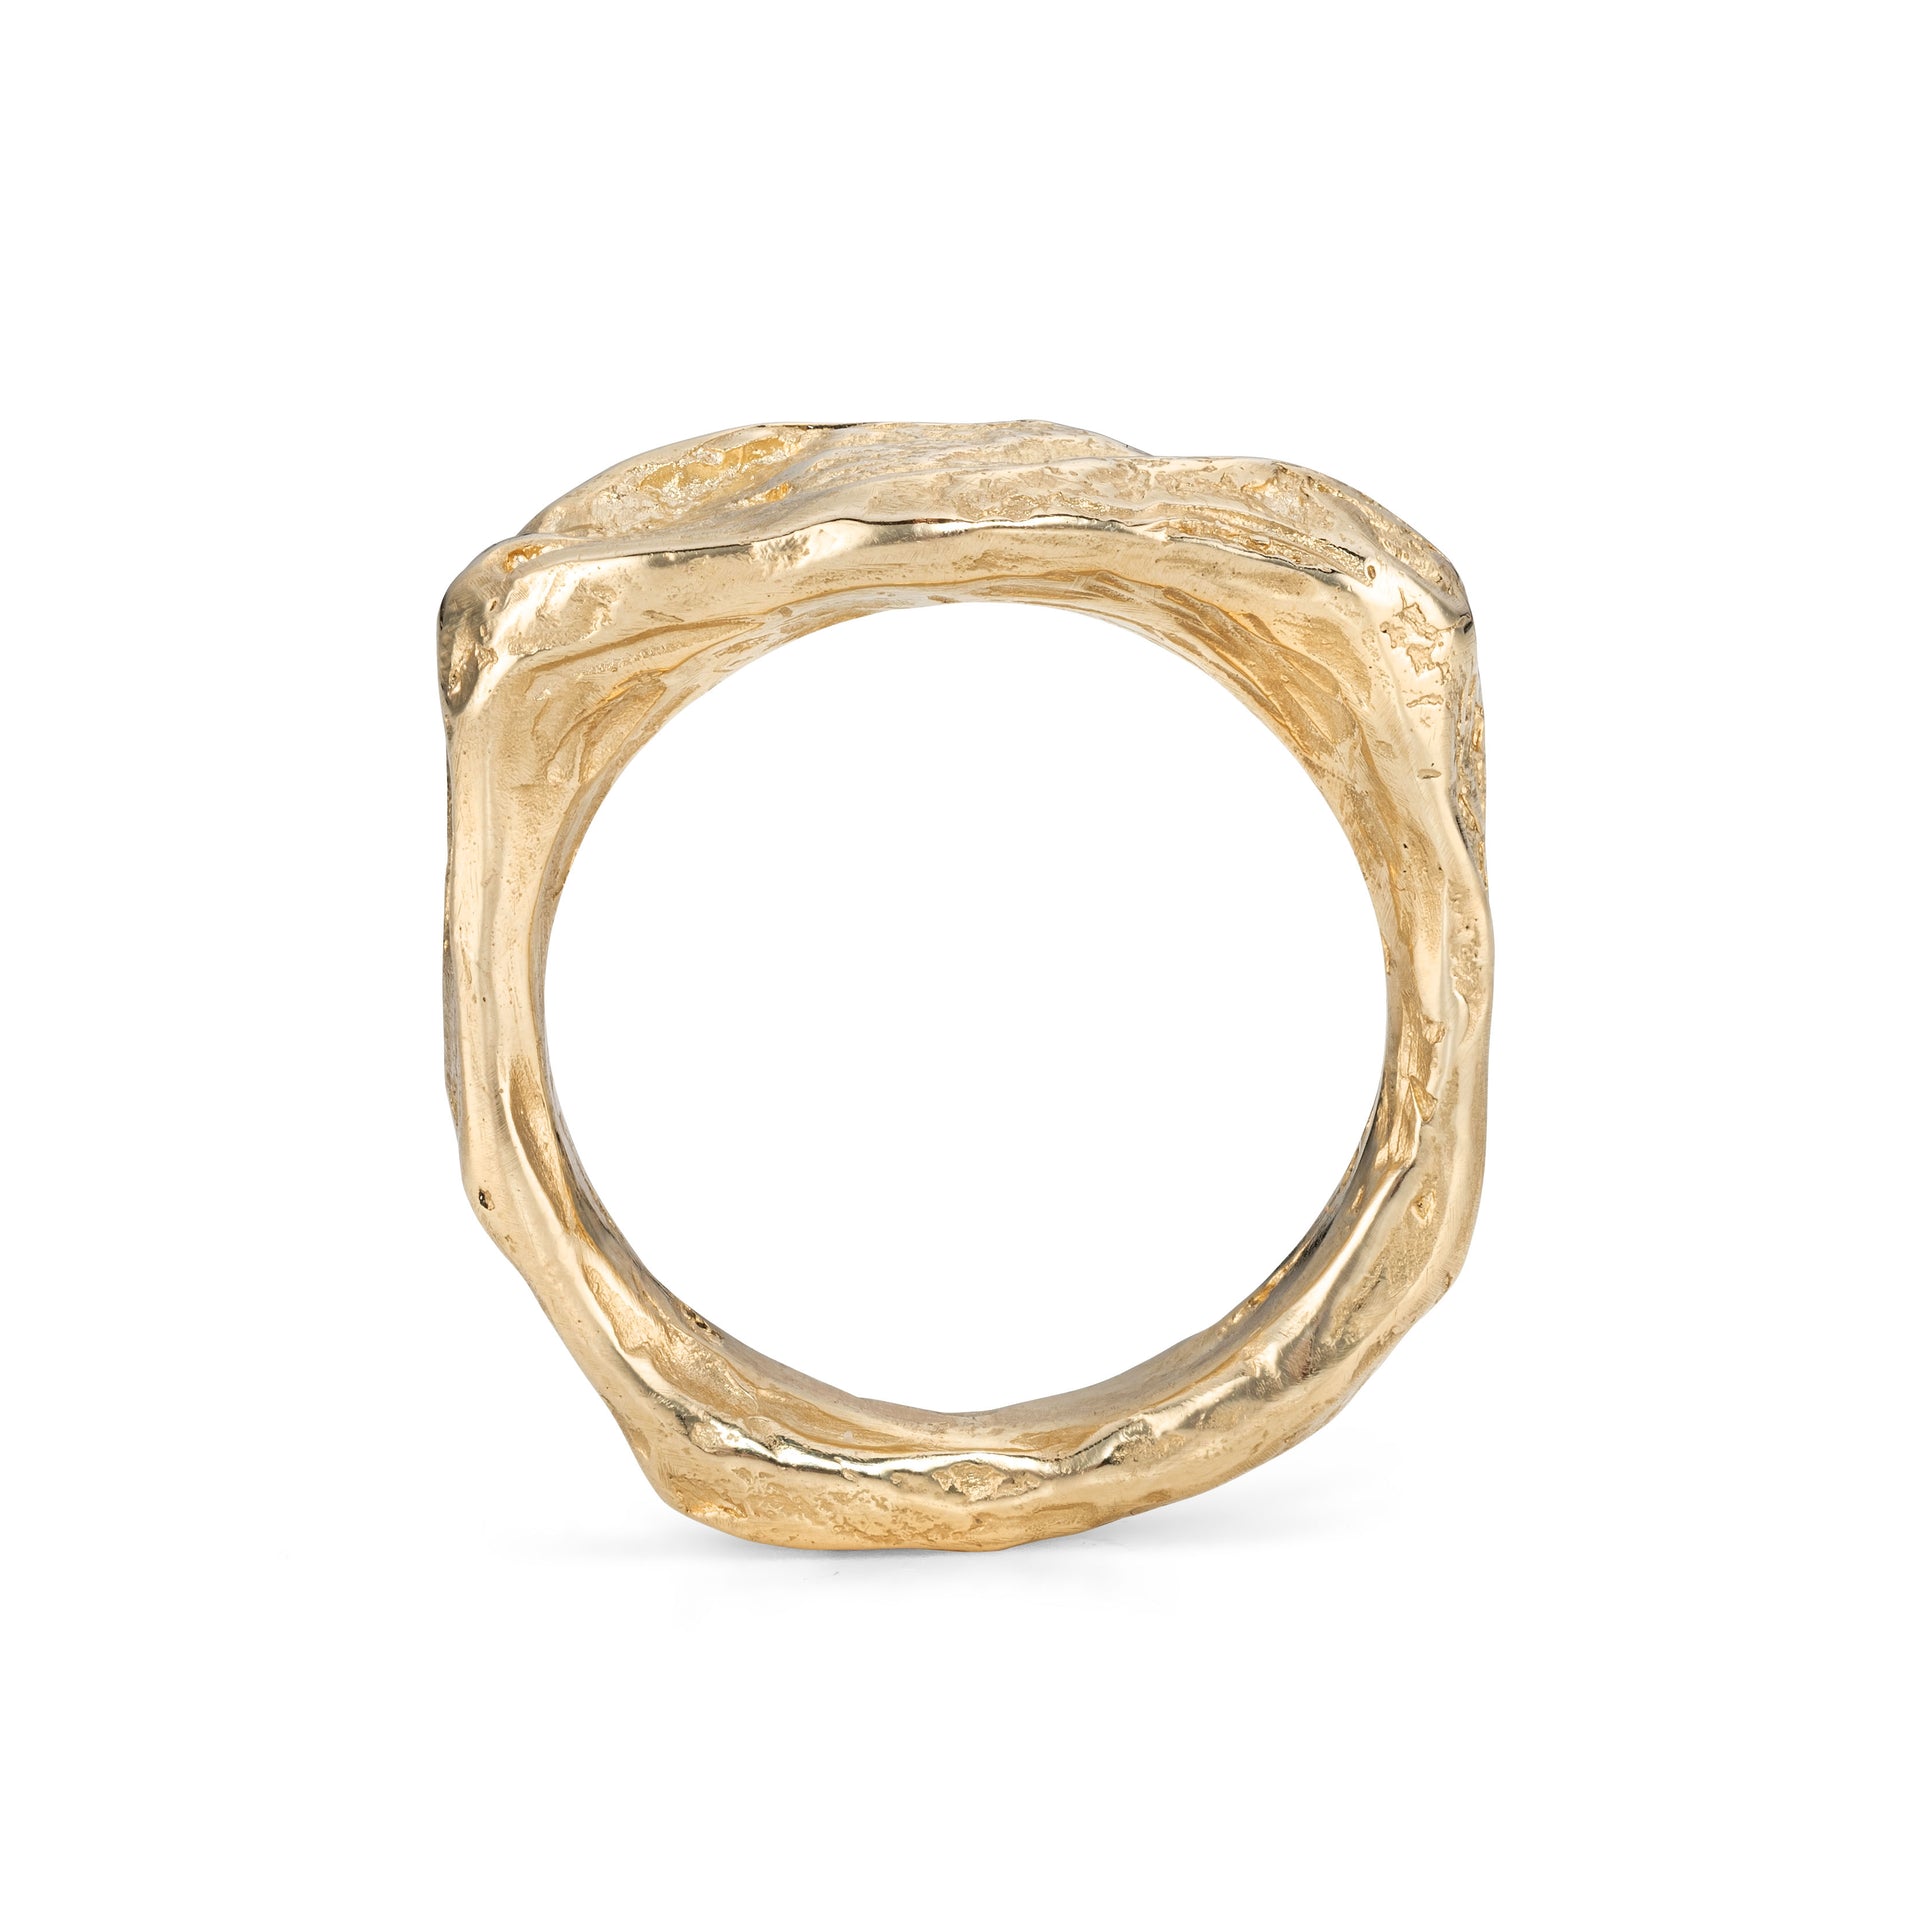 Coastal inspired mens signet ring made from recycled gold. Designed by Cornish jewellery designer - Emily Nixon